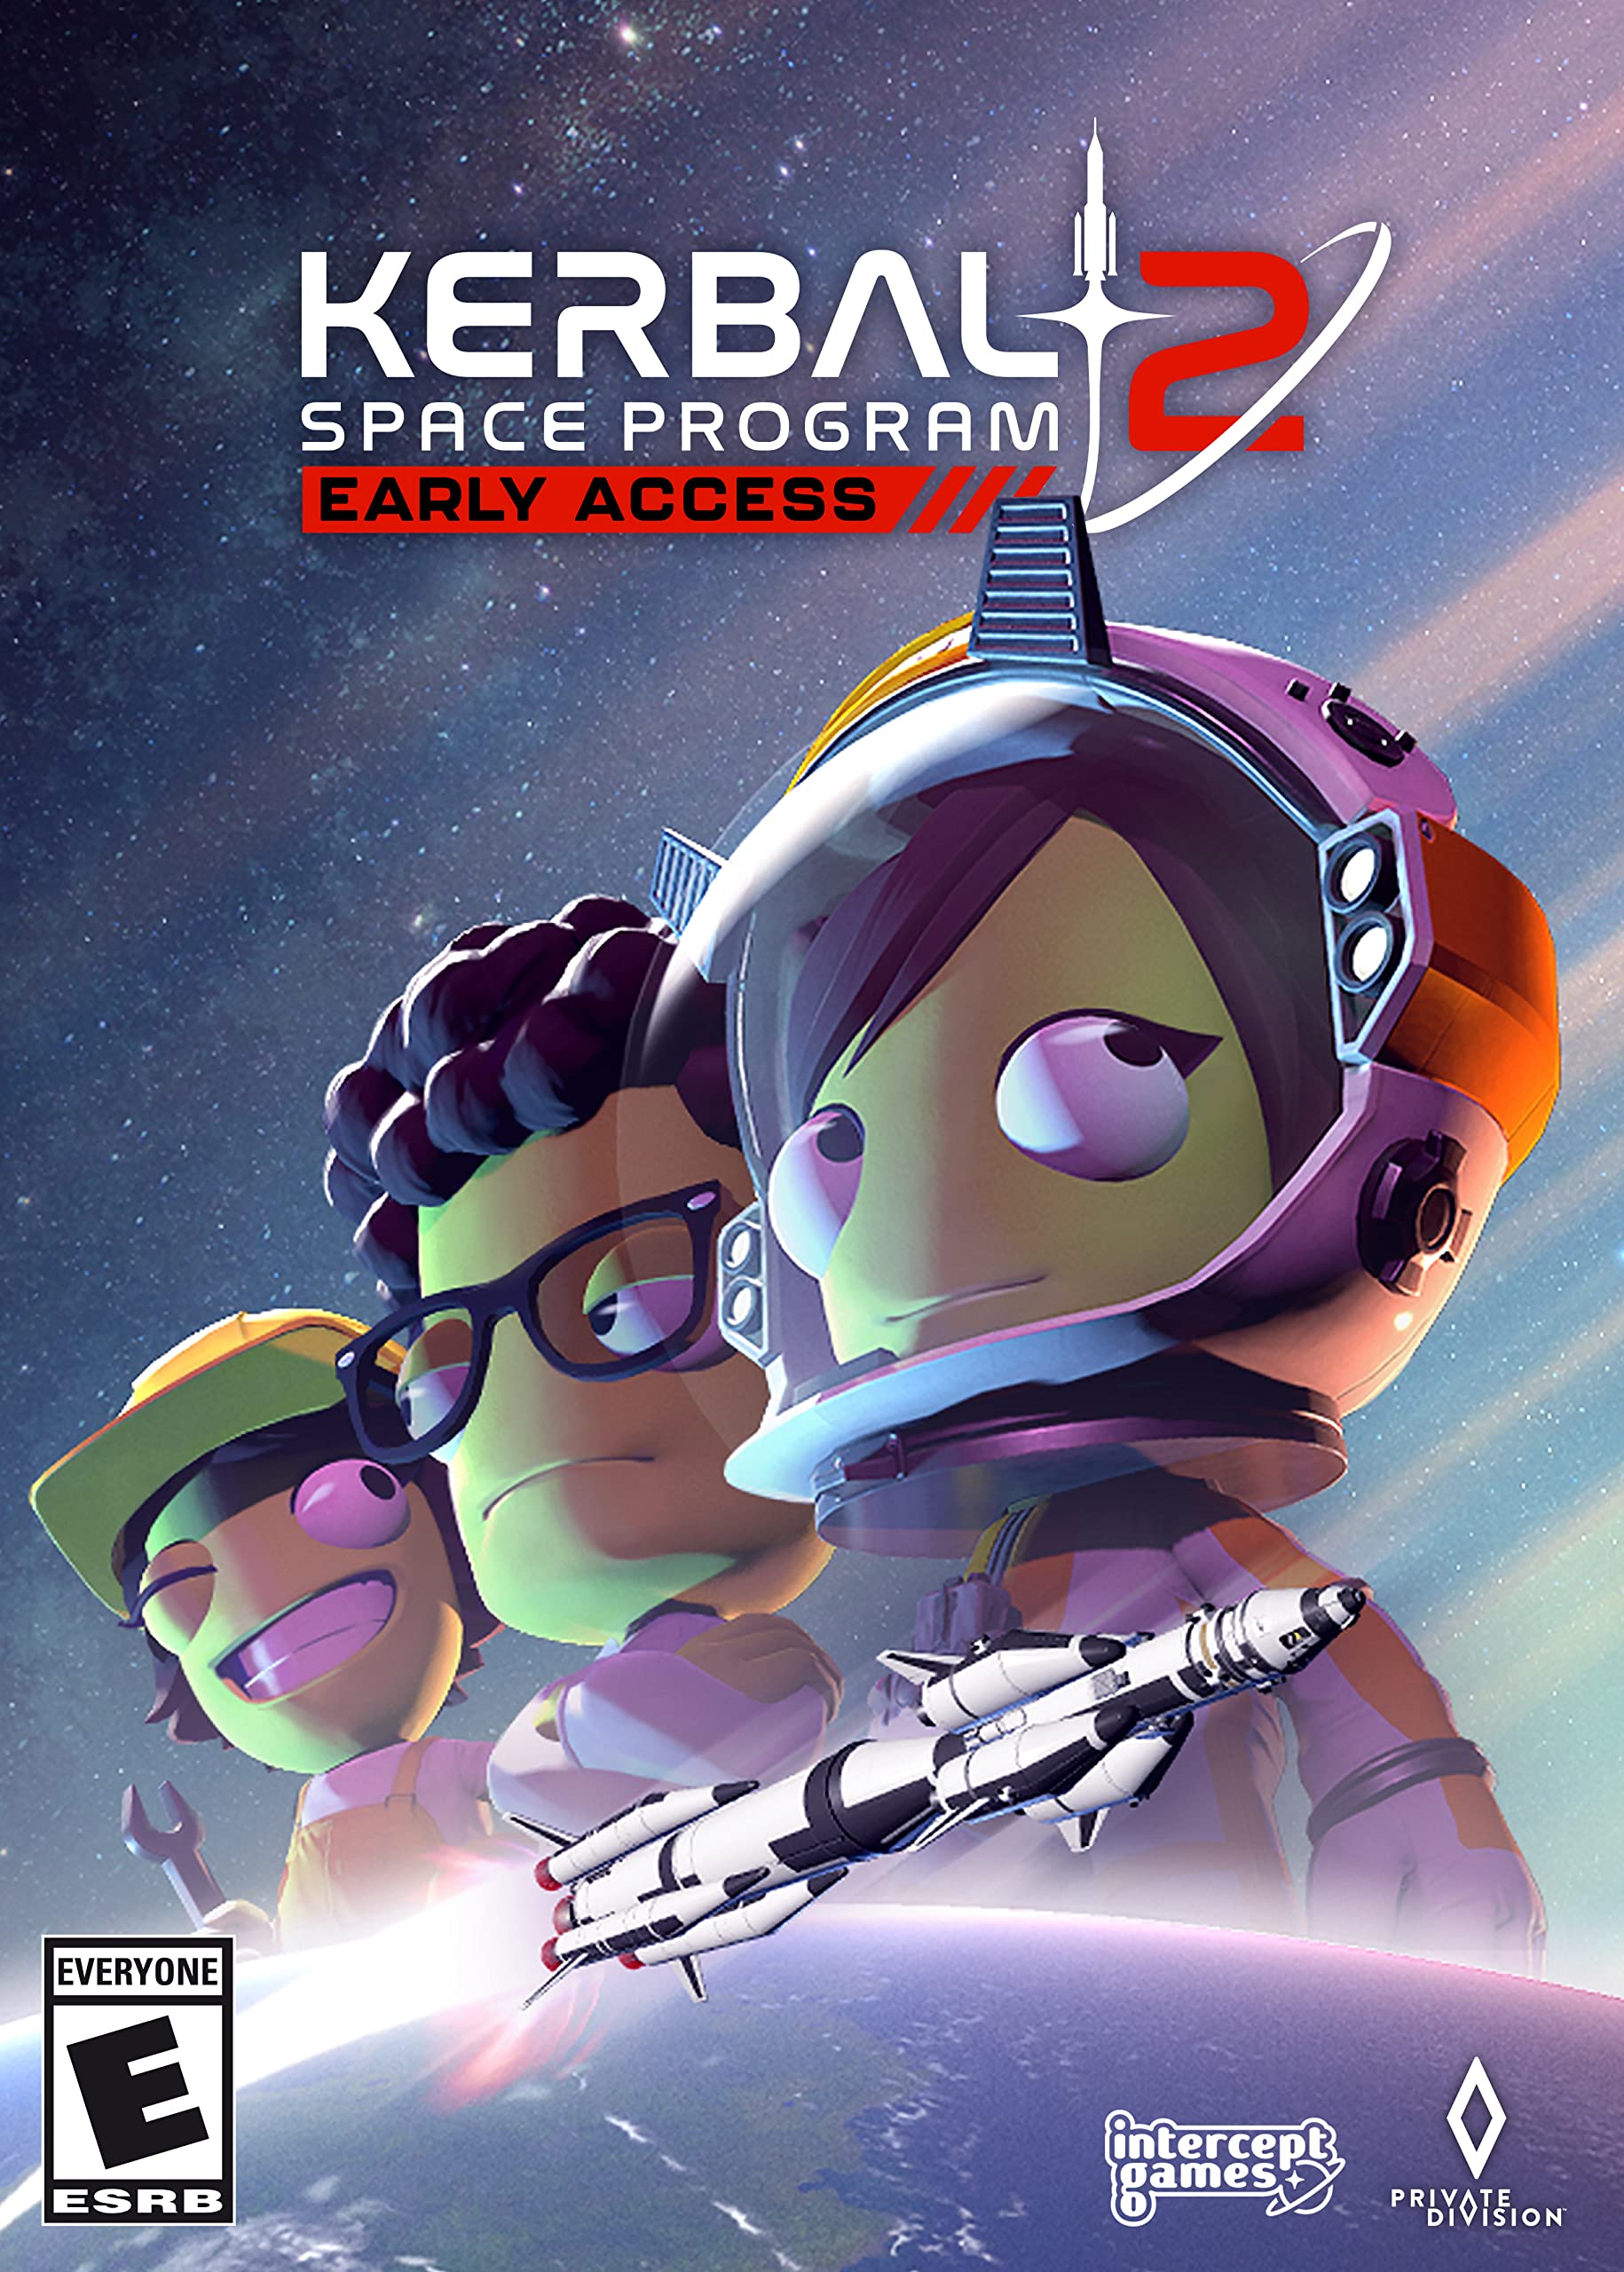 Kerbal Space Program 2 Early Access - PC [Online Game Code]